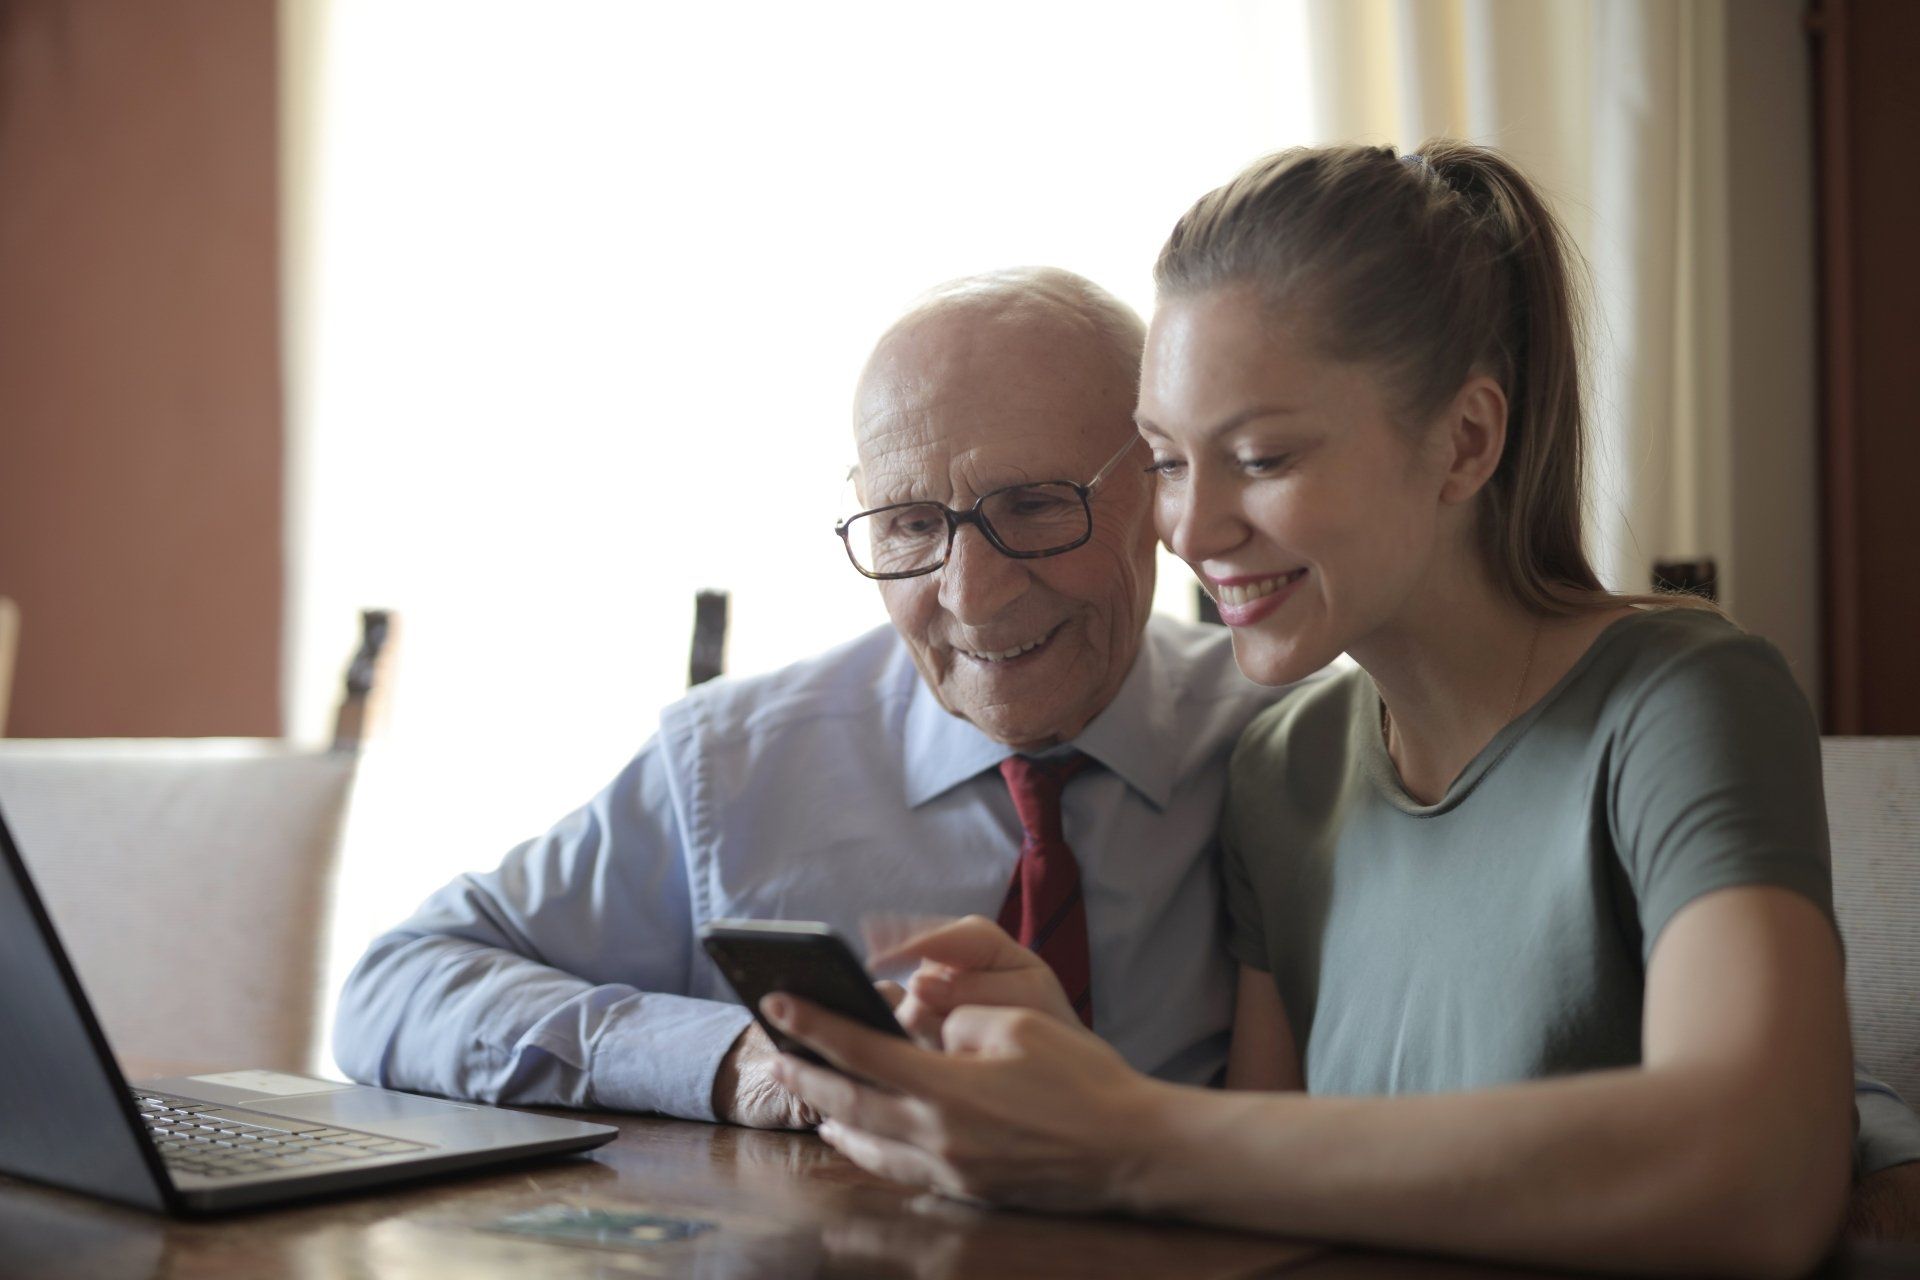 Elder man sitting next to young woman looking at phone